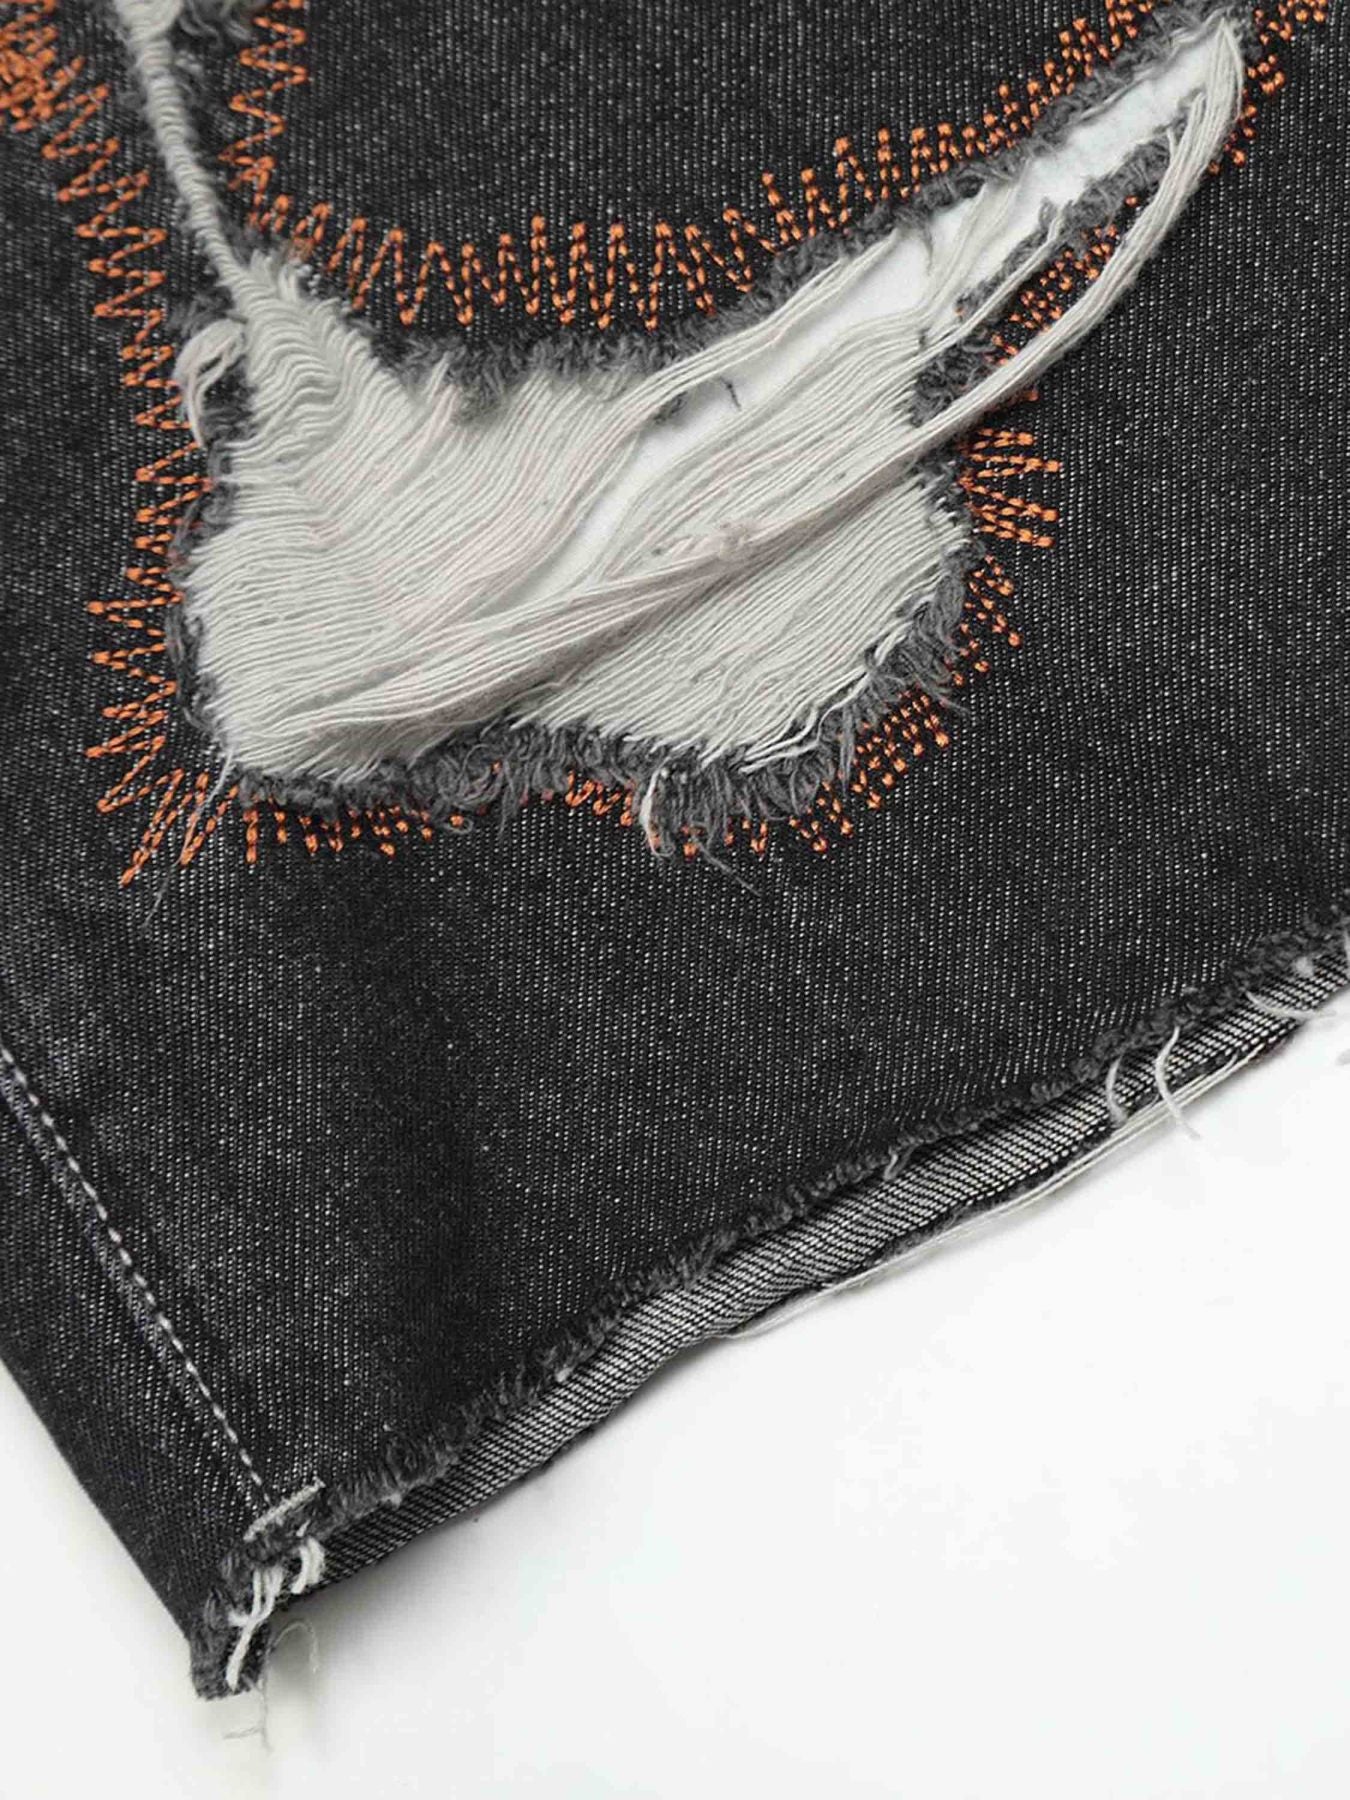 The Supermade American Style Worn And Torn Embroidered Jeans